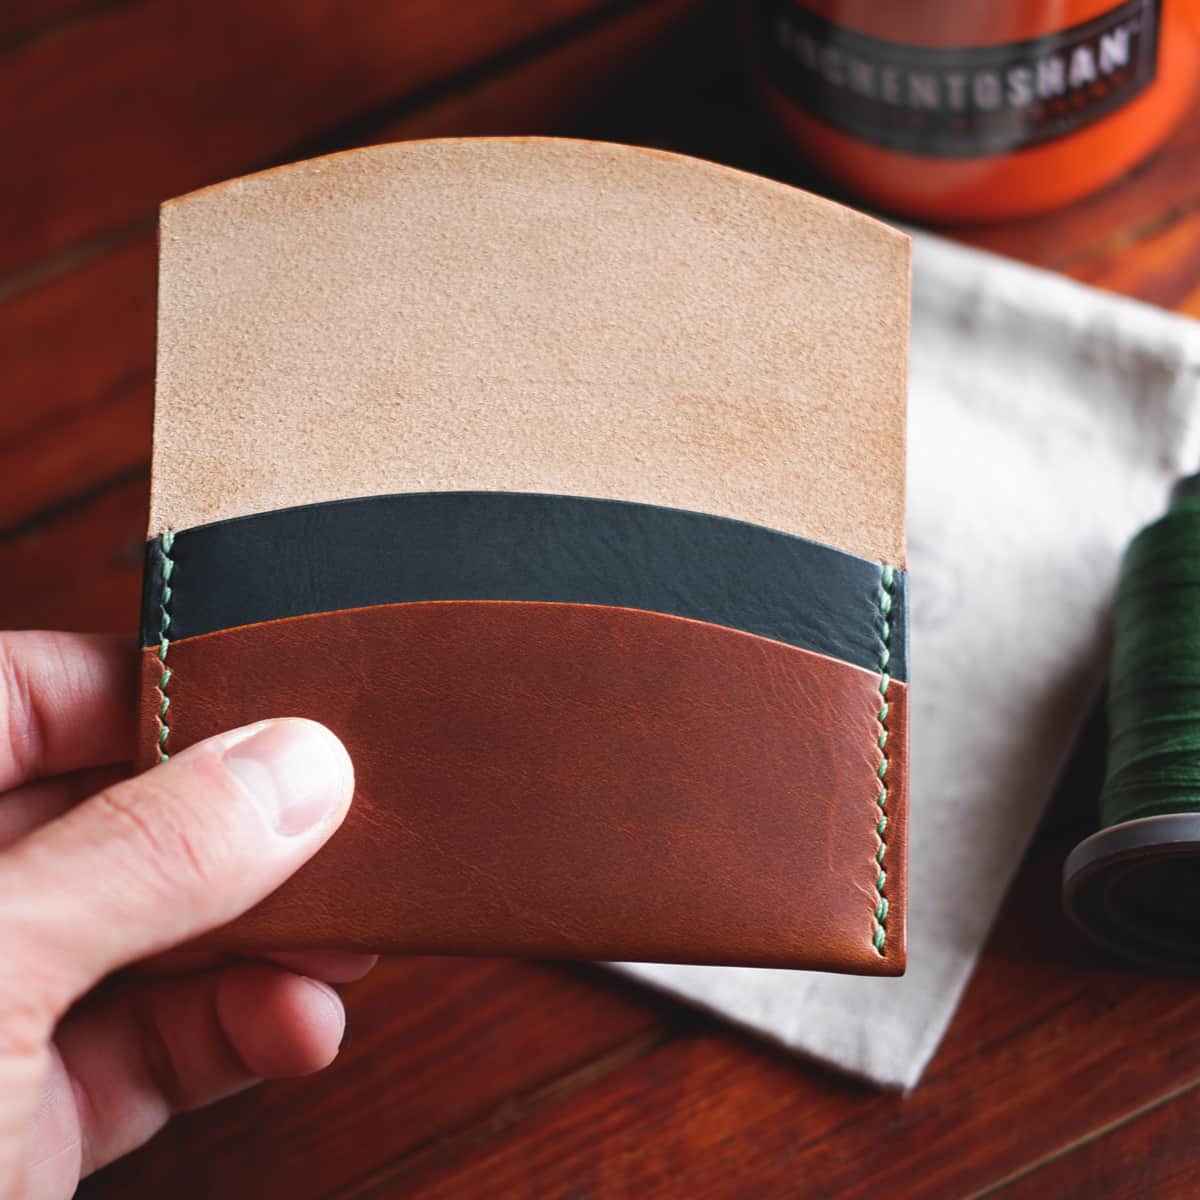 Interior view of The Mountain Card Wallet - empty